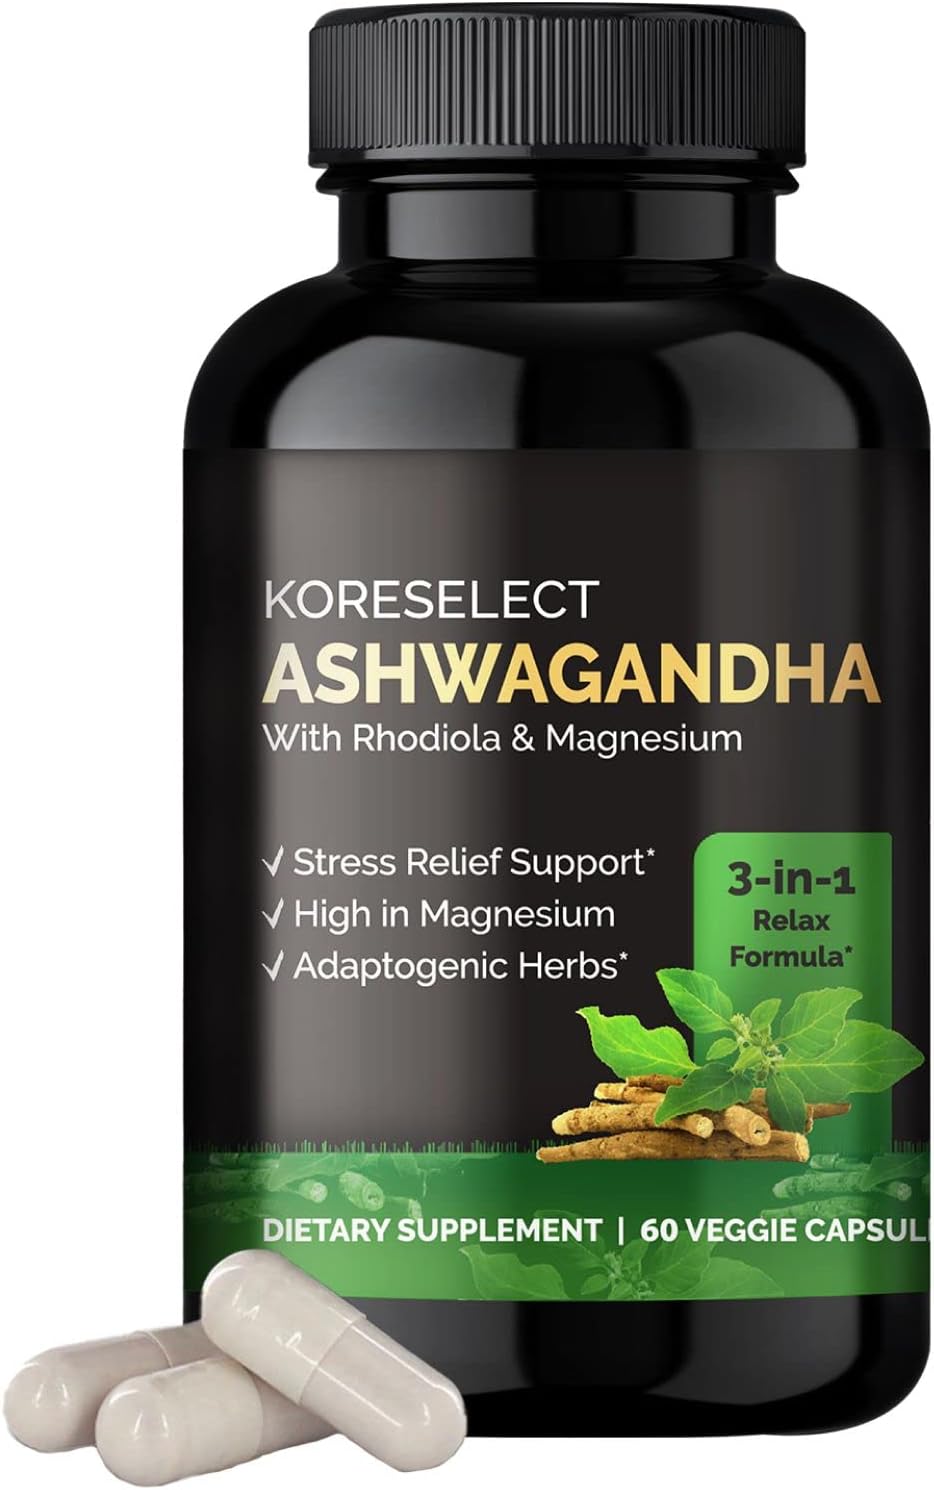 Ashwagandha 250mg Capsules with Magnesium & Rhodiola Rosea - 5% Withanolides, Natural Mood Suport, Adaptogens Supplement, Boost Energy & Focus - Vegan 60 Caps